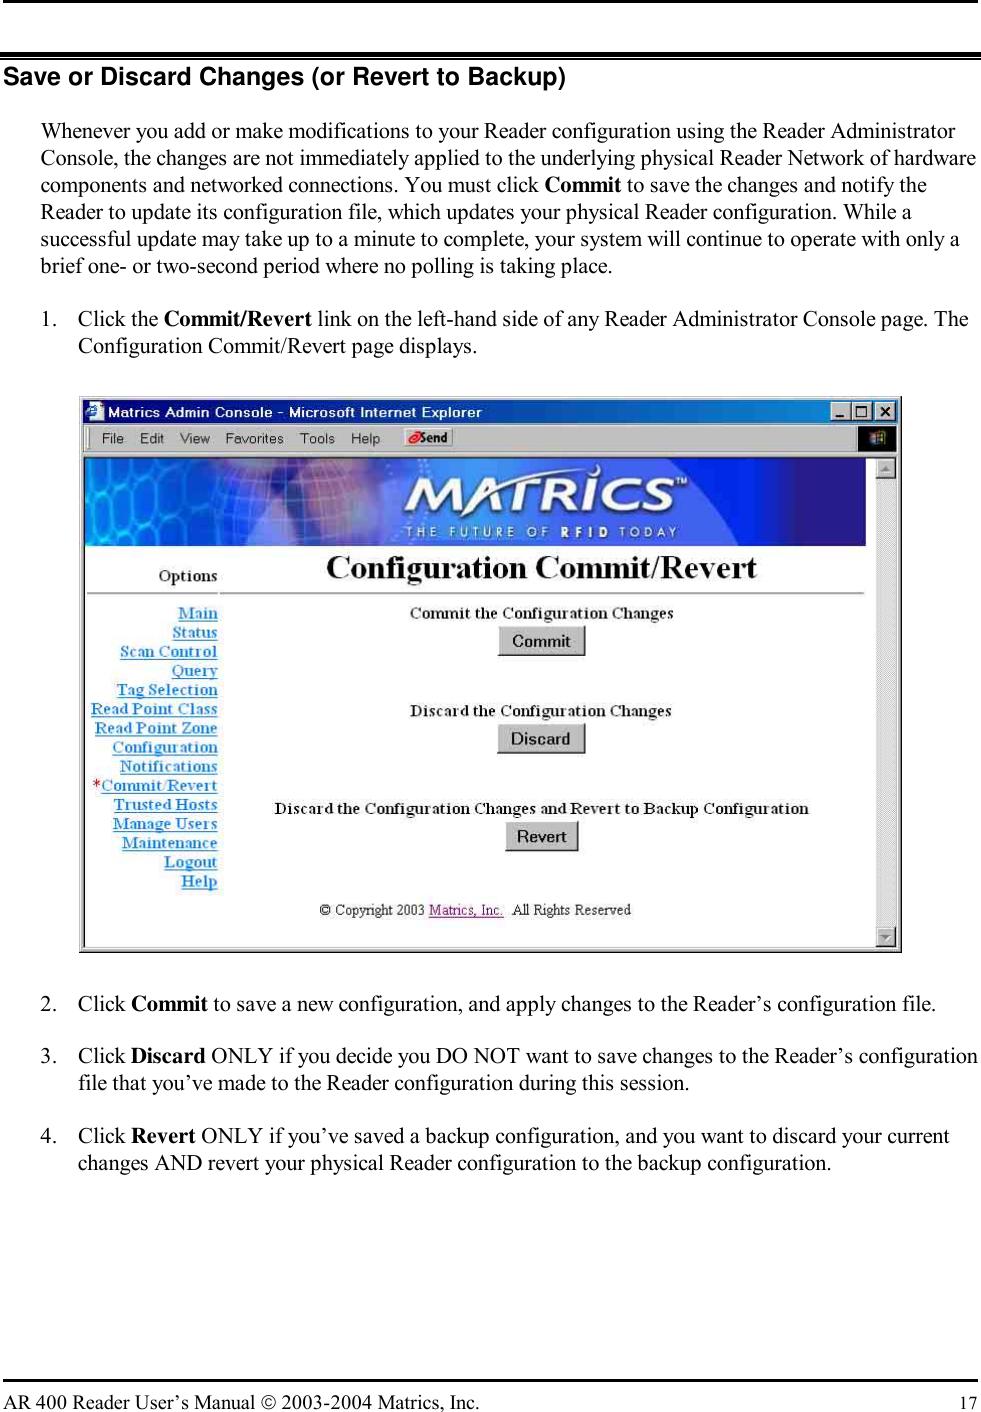   AR 400 Reader User’s Manual  2003-2004 Matrics, Inc.  17 Save or Discard Changes (or Revert to Backup) Whenever you add or make modifications to your Reader configuration using the Reader Administrator Console, the changes are not immediately applied to the underlying physical Reader Network of hardware components and networked connections. You must click Commit to save the changes and notify the Reader to update its configuration file, which updates your physical Reader configuration. While a successful update may take up to a minute to complete, your system will continue to operate with only a brief one- or two-second period where no polling is taking place. 1. Click the Commit/Revert link on the left-hand side of any Reader Administrator Console page. The Configuration Commit/Revert page displays.  2. Click Commit to save a new configuration, and apply changes to the Reader’s configuration file. 3. Click Discard ONLY if you decide you DO NOT want to save changes to the Reader’s configuration file that you’ve made to the Reader configuration during this session. 4. Click Revert ONLY if you’ve saved a backup configuration, and you want to discard your current changes AND revert your physical Reader configuration to the backup configuration. 